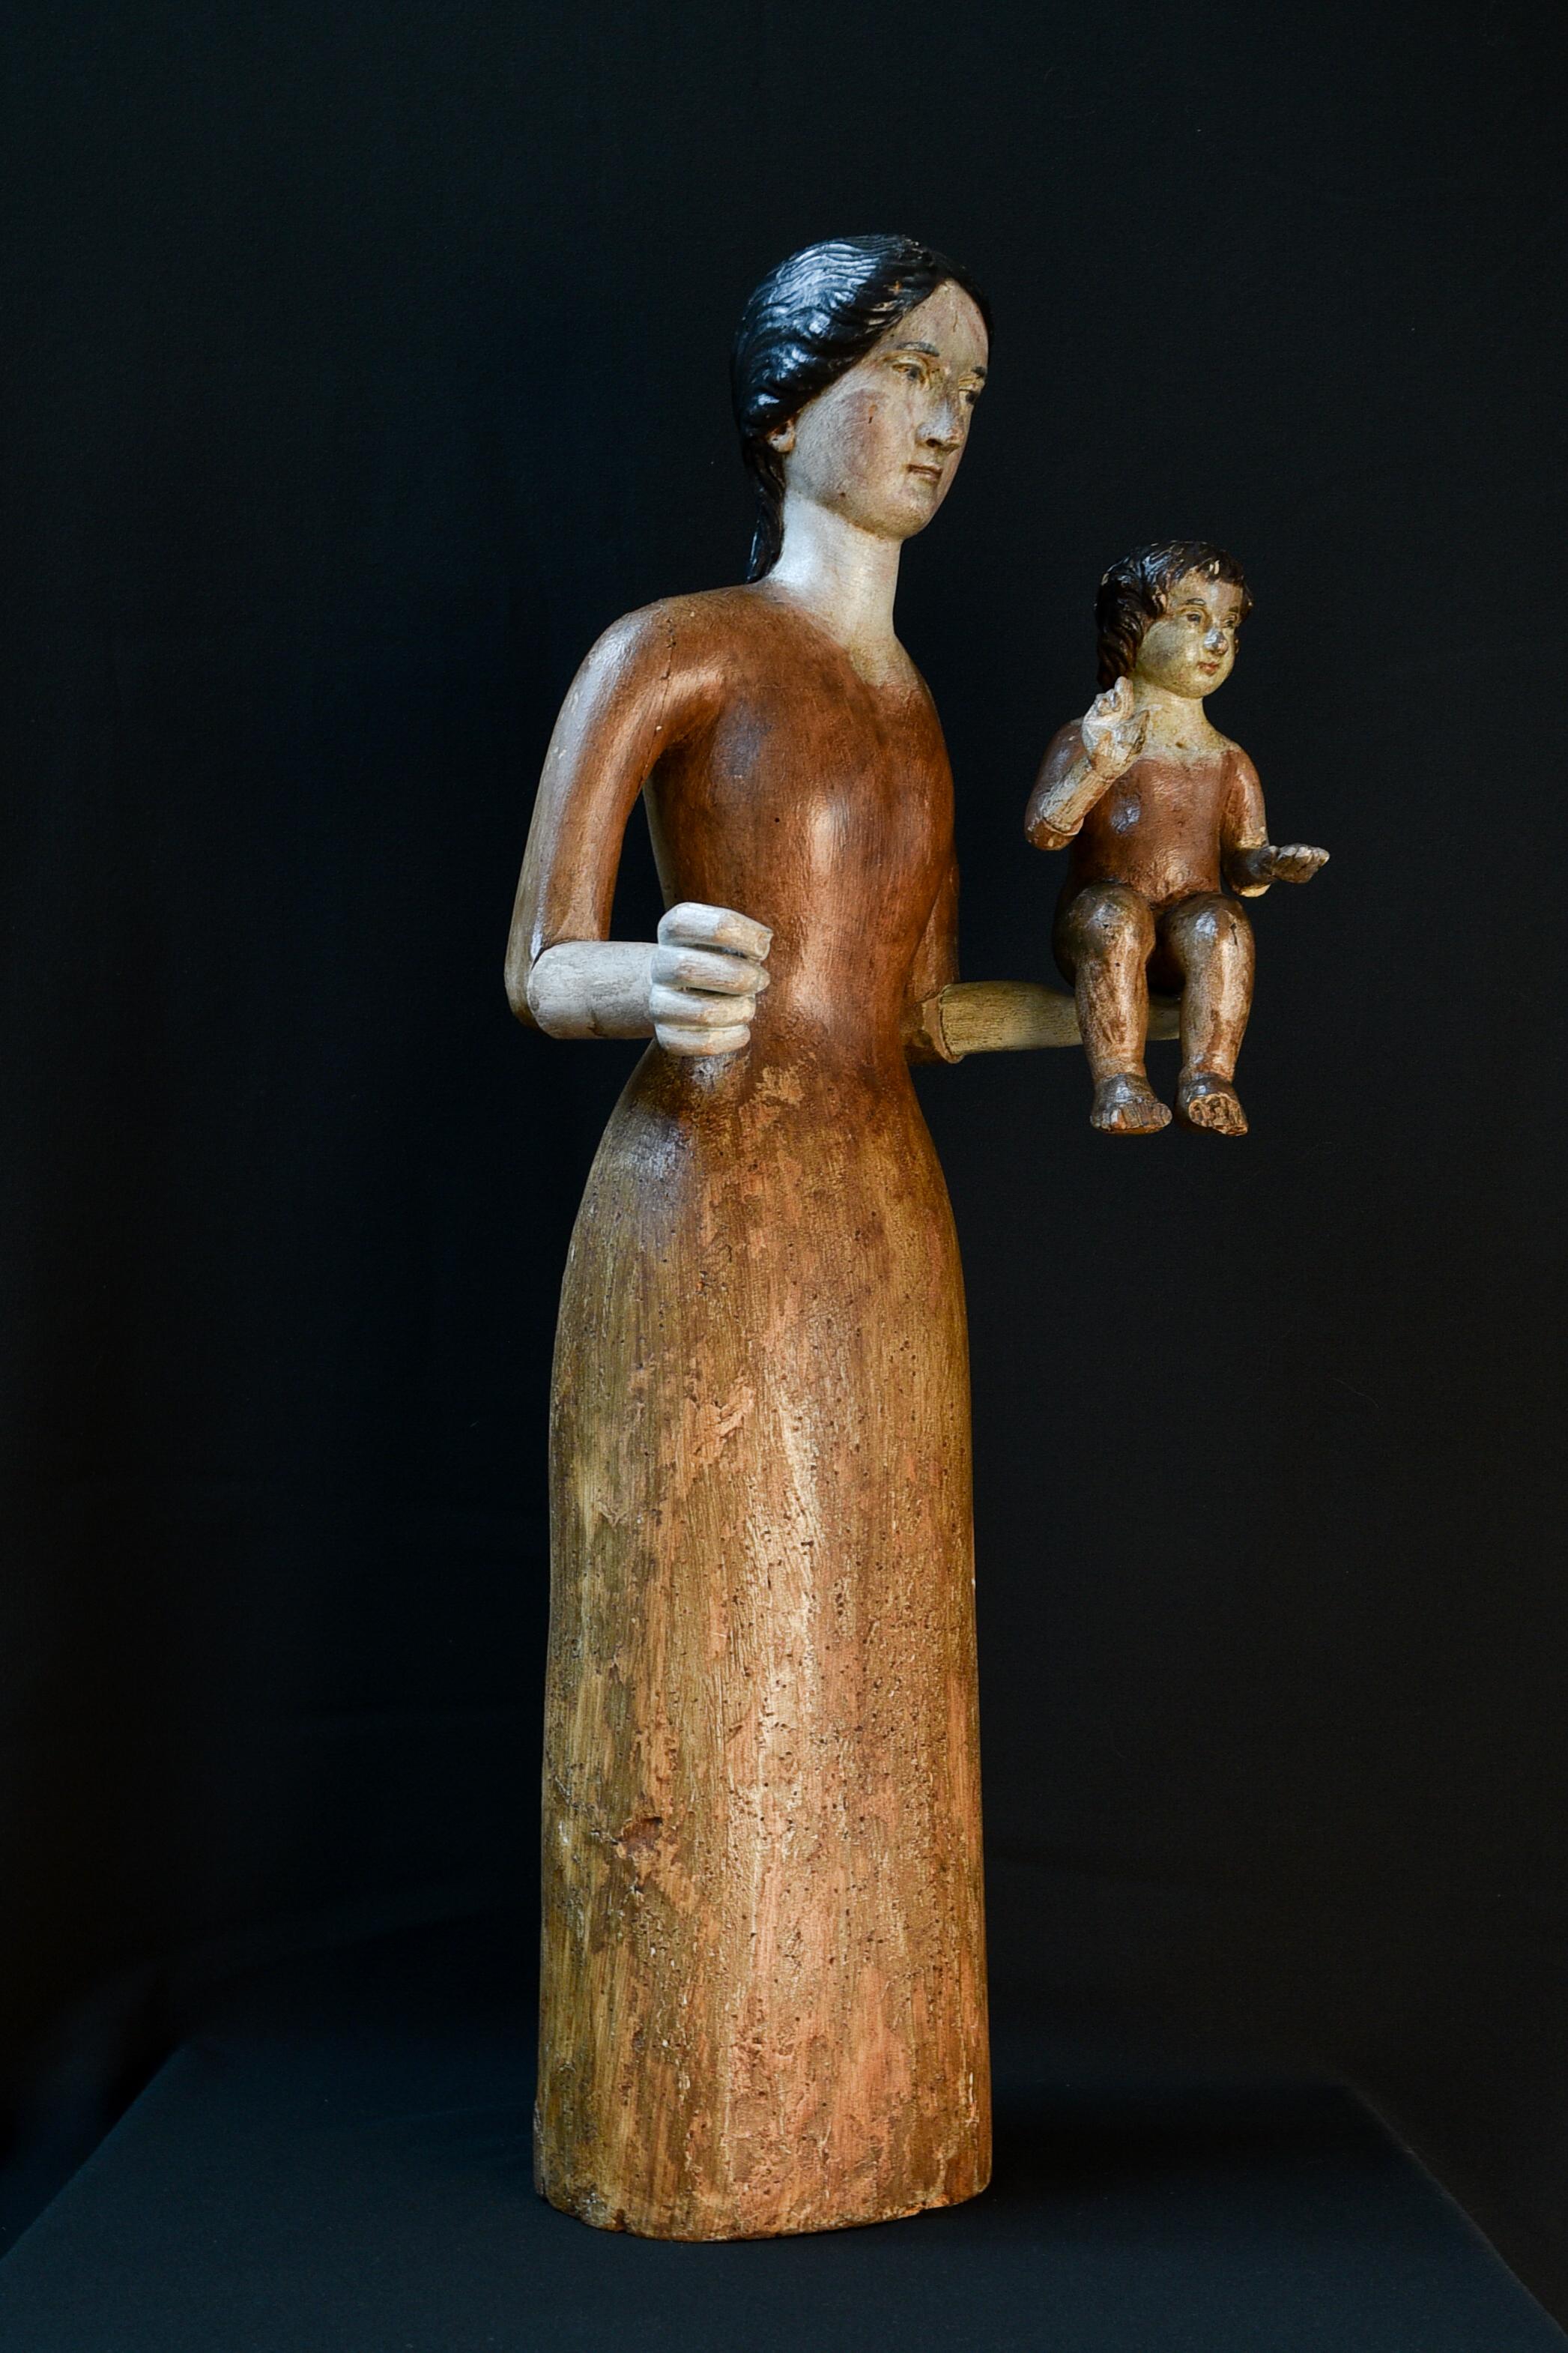 18th century wooden hand-carved Madonna with child sculpture (South-Europe) For Sale 3